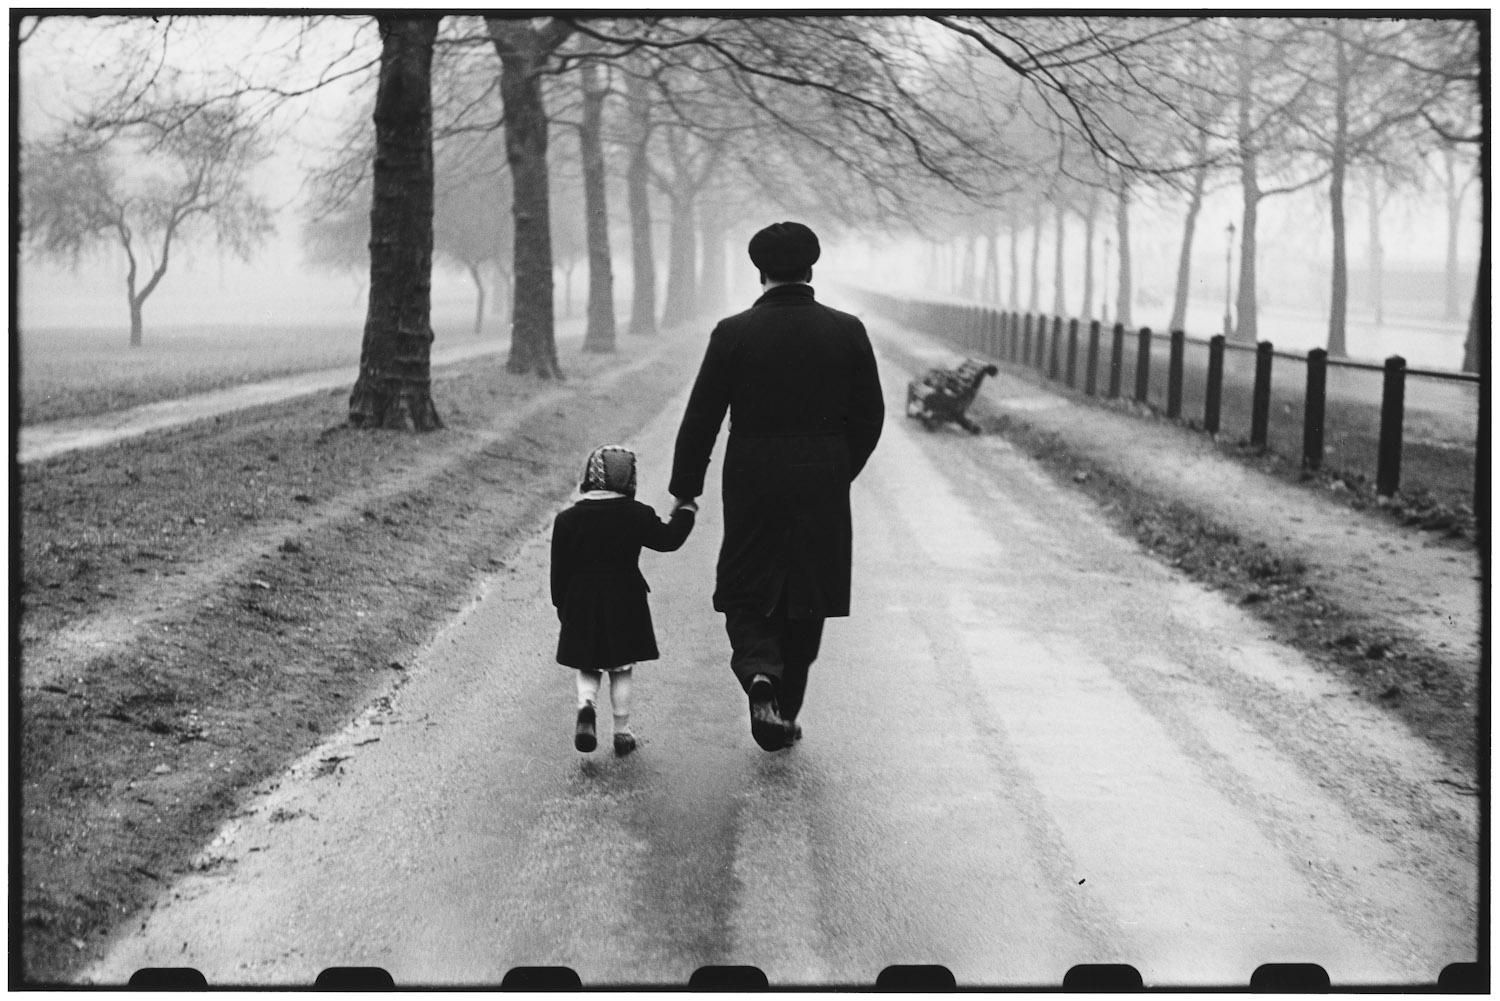 England, London, 1952 - Elliott Erwitt (Black and White Photography)
Signed, inscribed with title and dated on accompanying artist’s label
Silver gelatin print, printed later

Available in four sizes:
11 x 14 inches
16 x 20 inches
20 x 24 inches
30